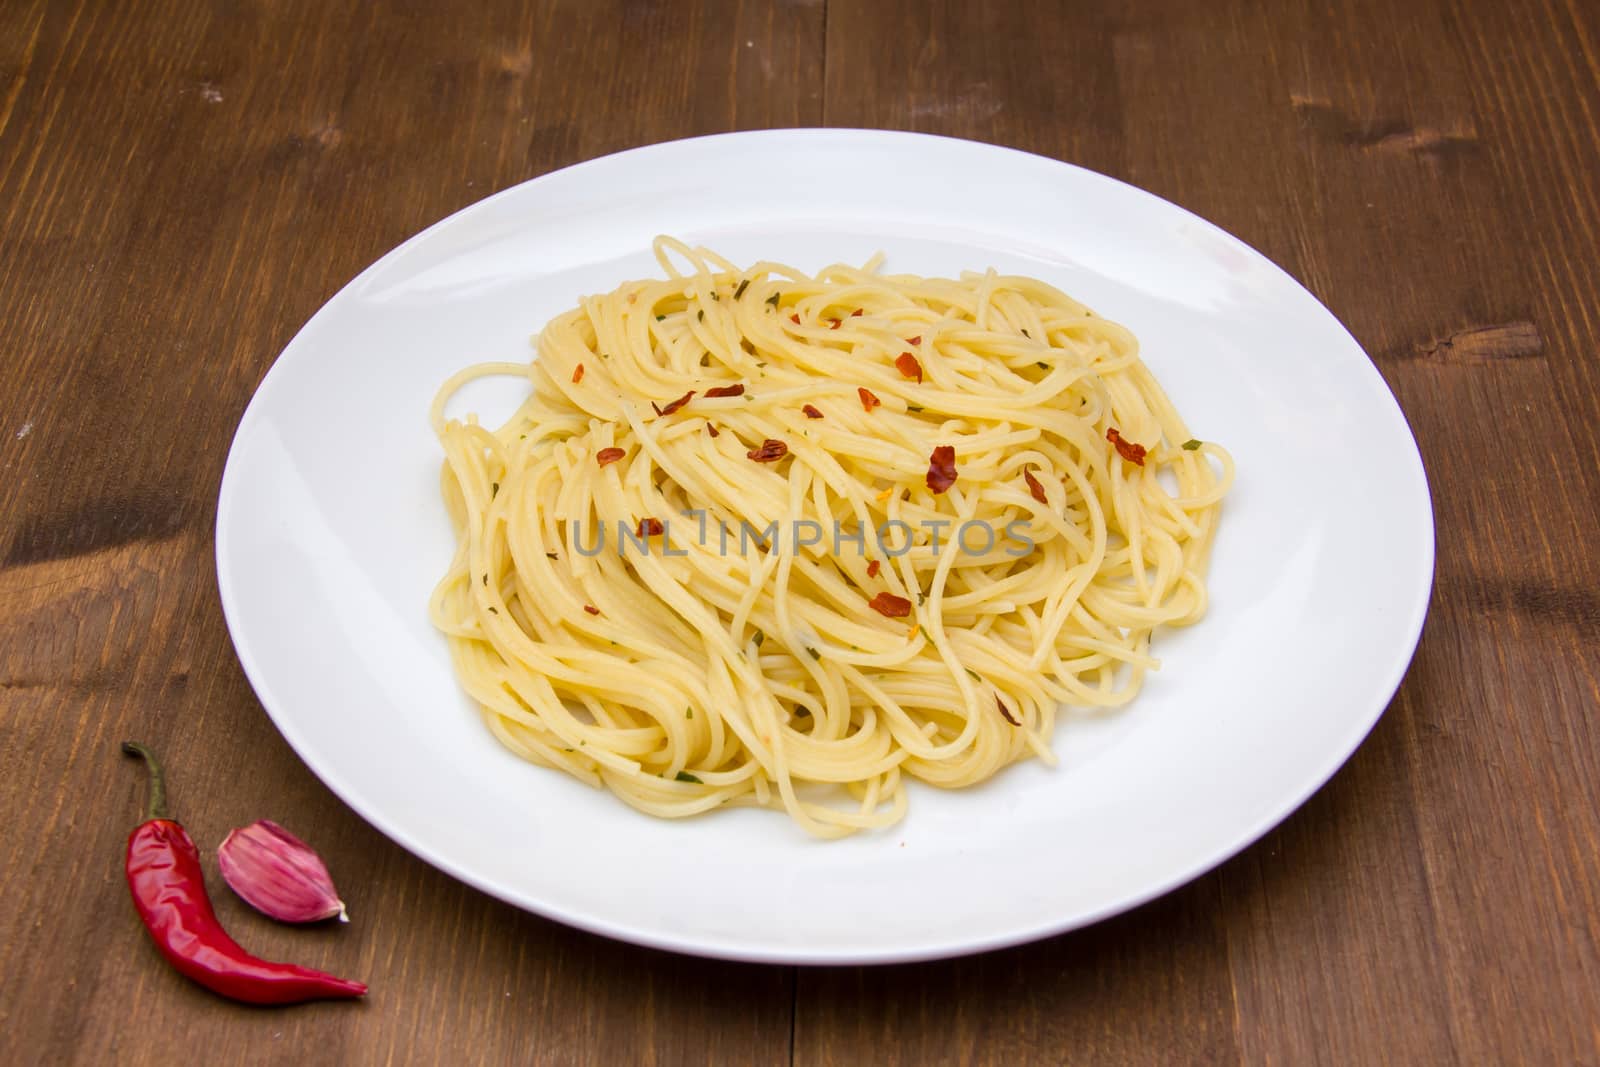 Spaghetti with garlic and chili peppers on wood by spafra